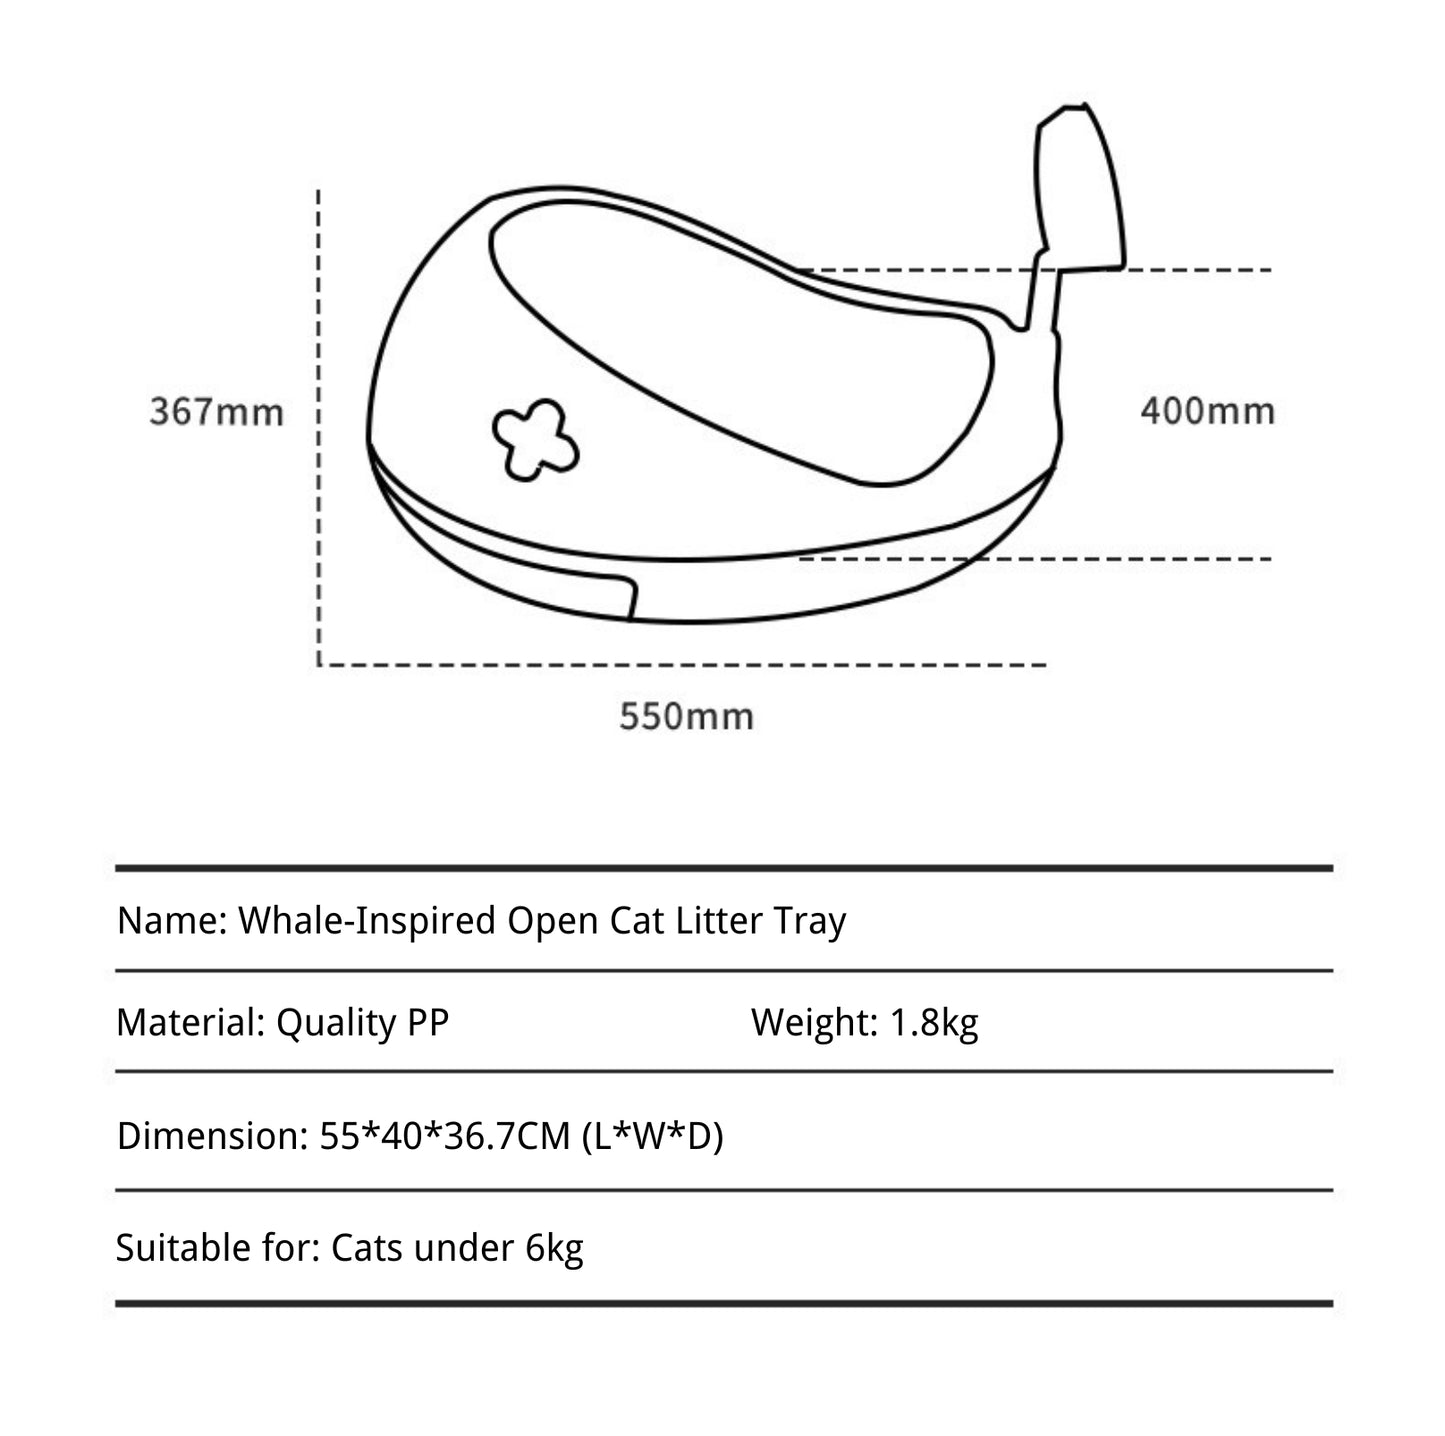 Whale-Inspired Open Cat Litter Tray With Scooper